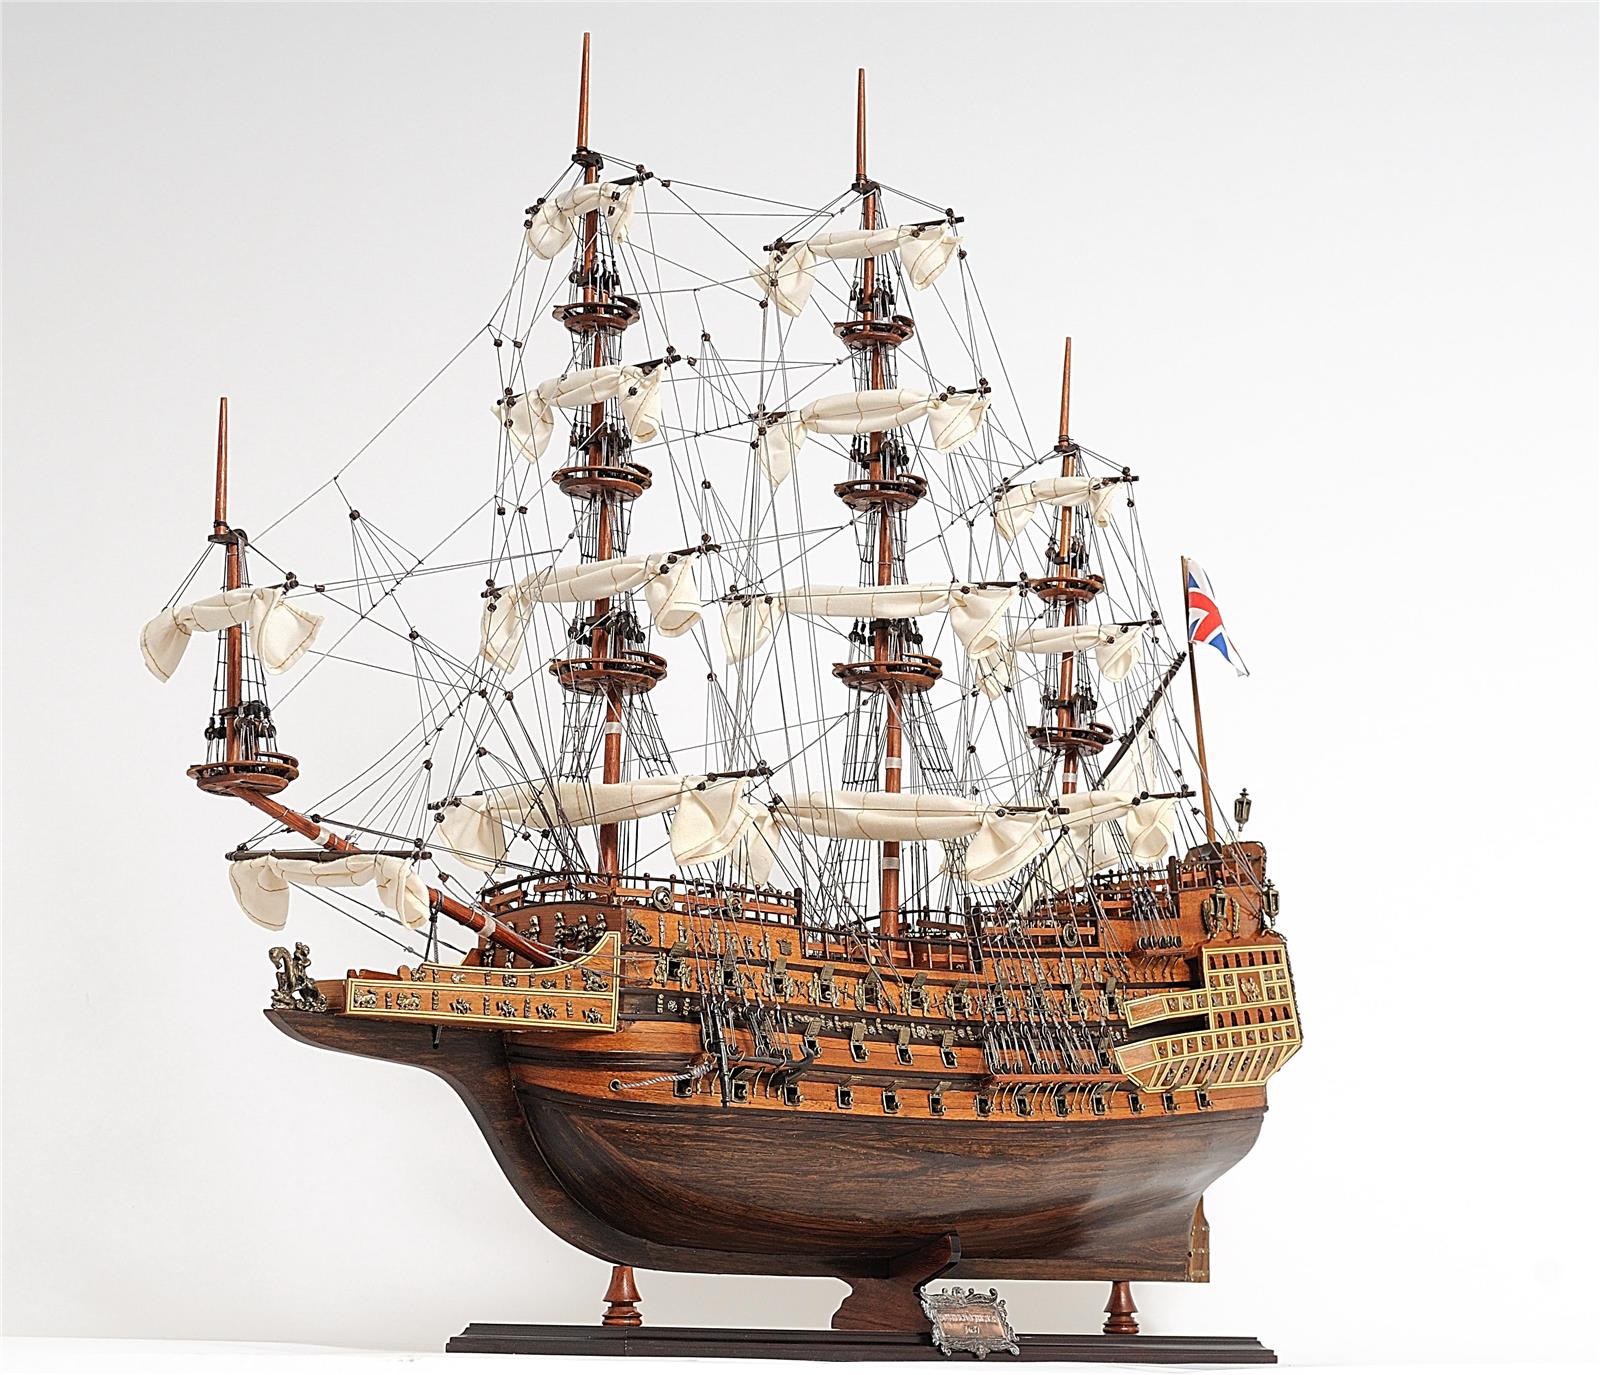 Ship Model Watercraft Traditional Antique Sovereign of the Seas Boats Sailing-Image 16